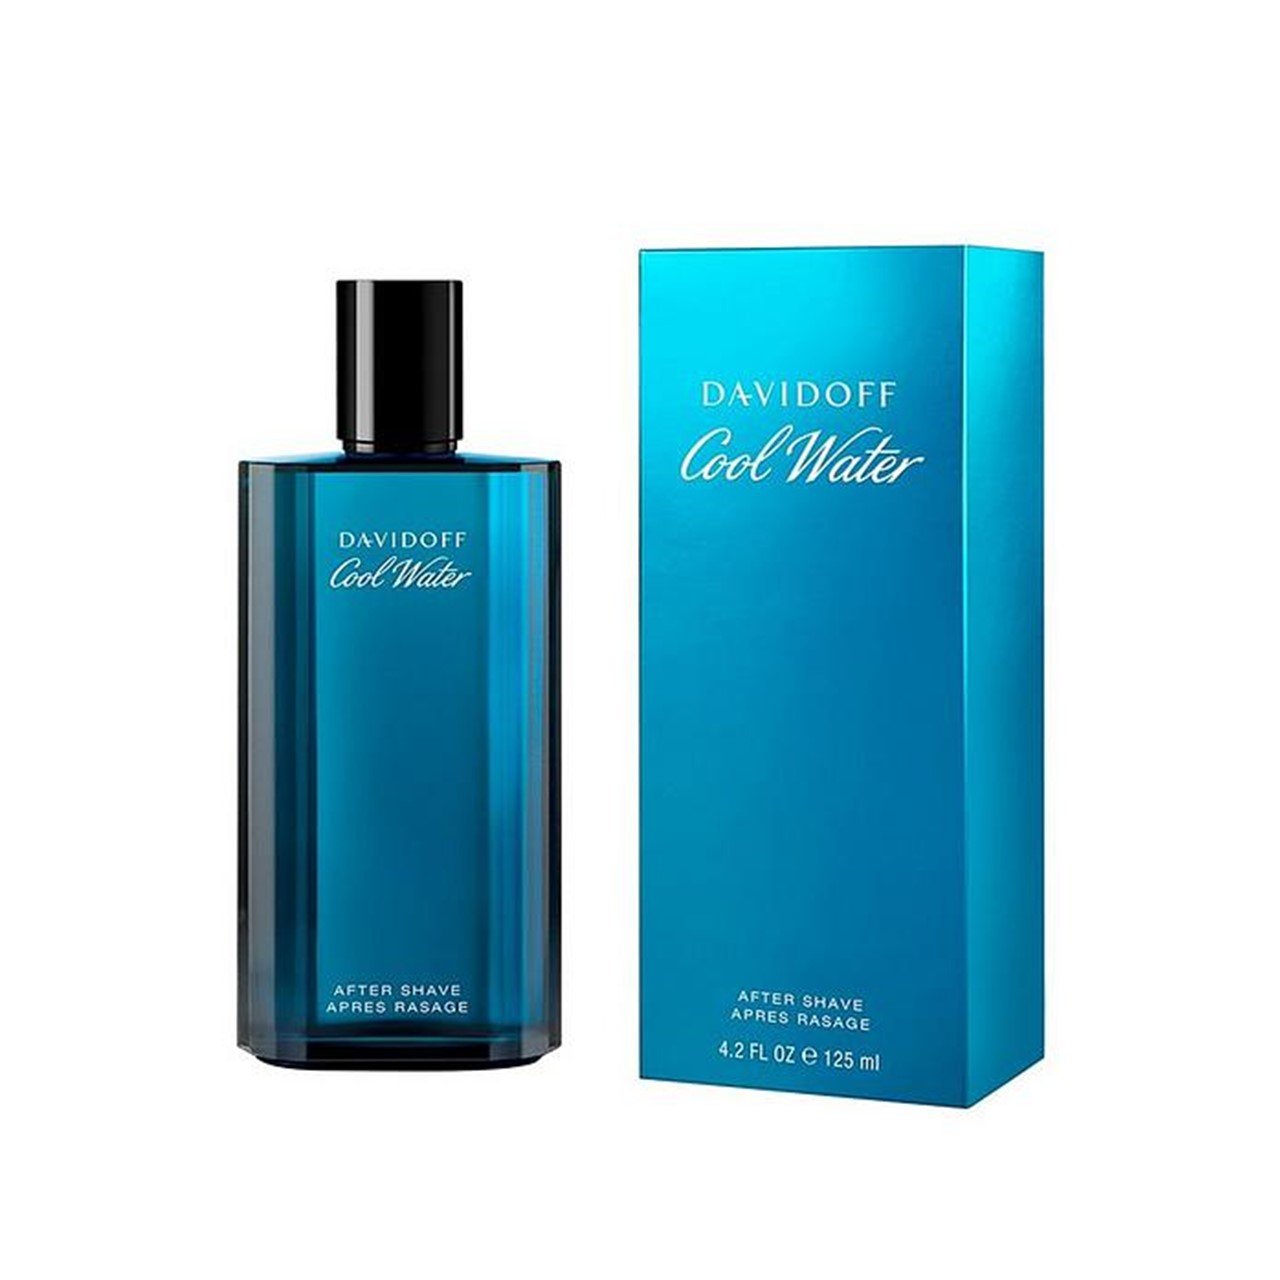 Davidoff Cool Water After Shave 125ml (4.23fl oz)